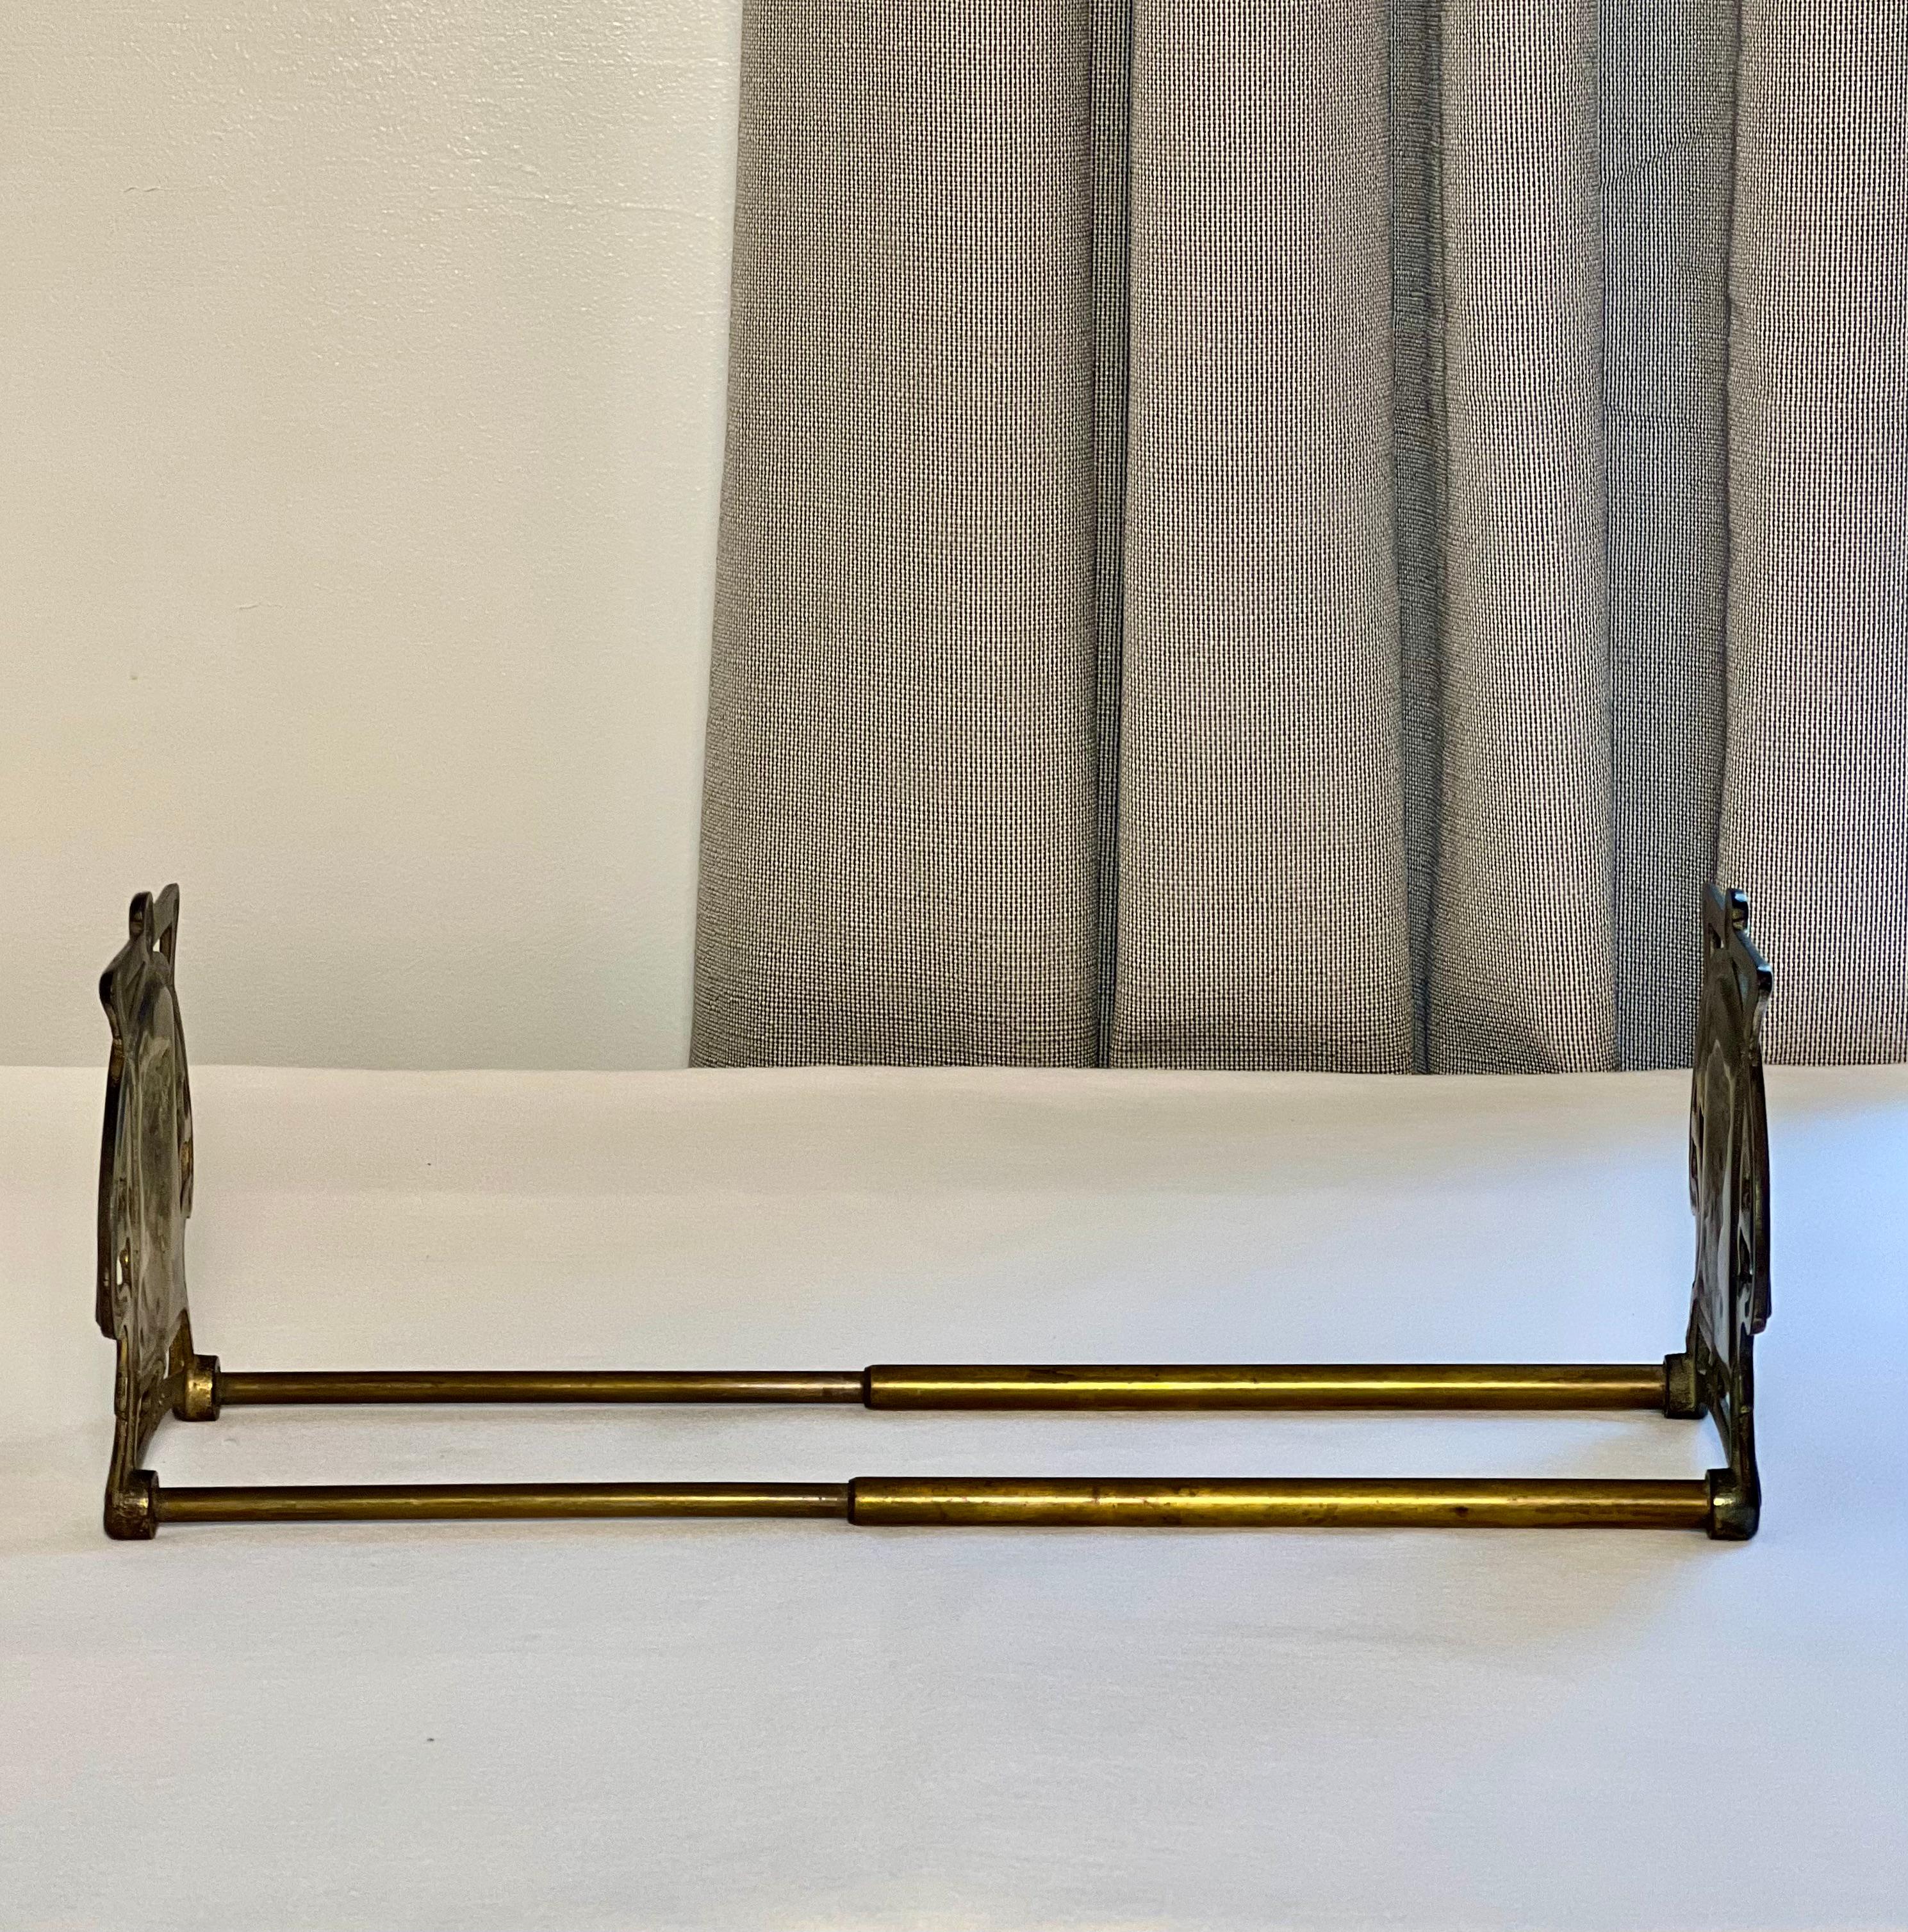 20th Century Antique Art Nouveau Cast Iron and Brass Adjustable Book Stand by Judd Company For Sale